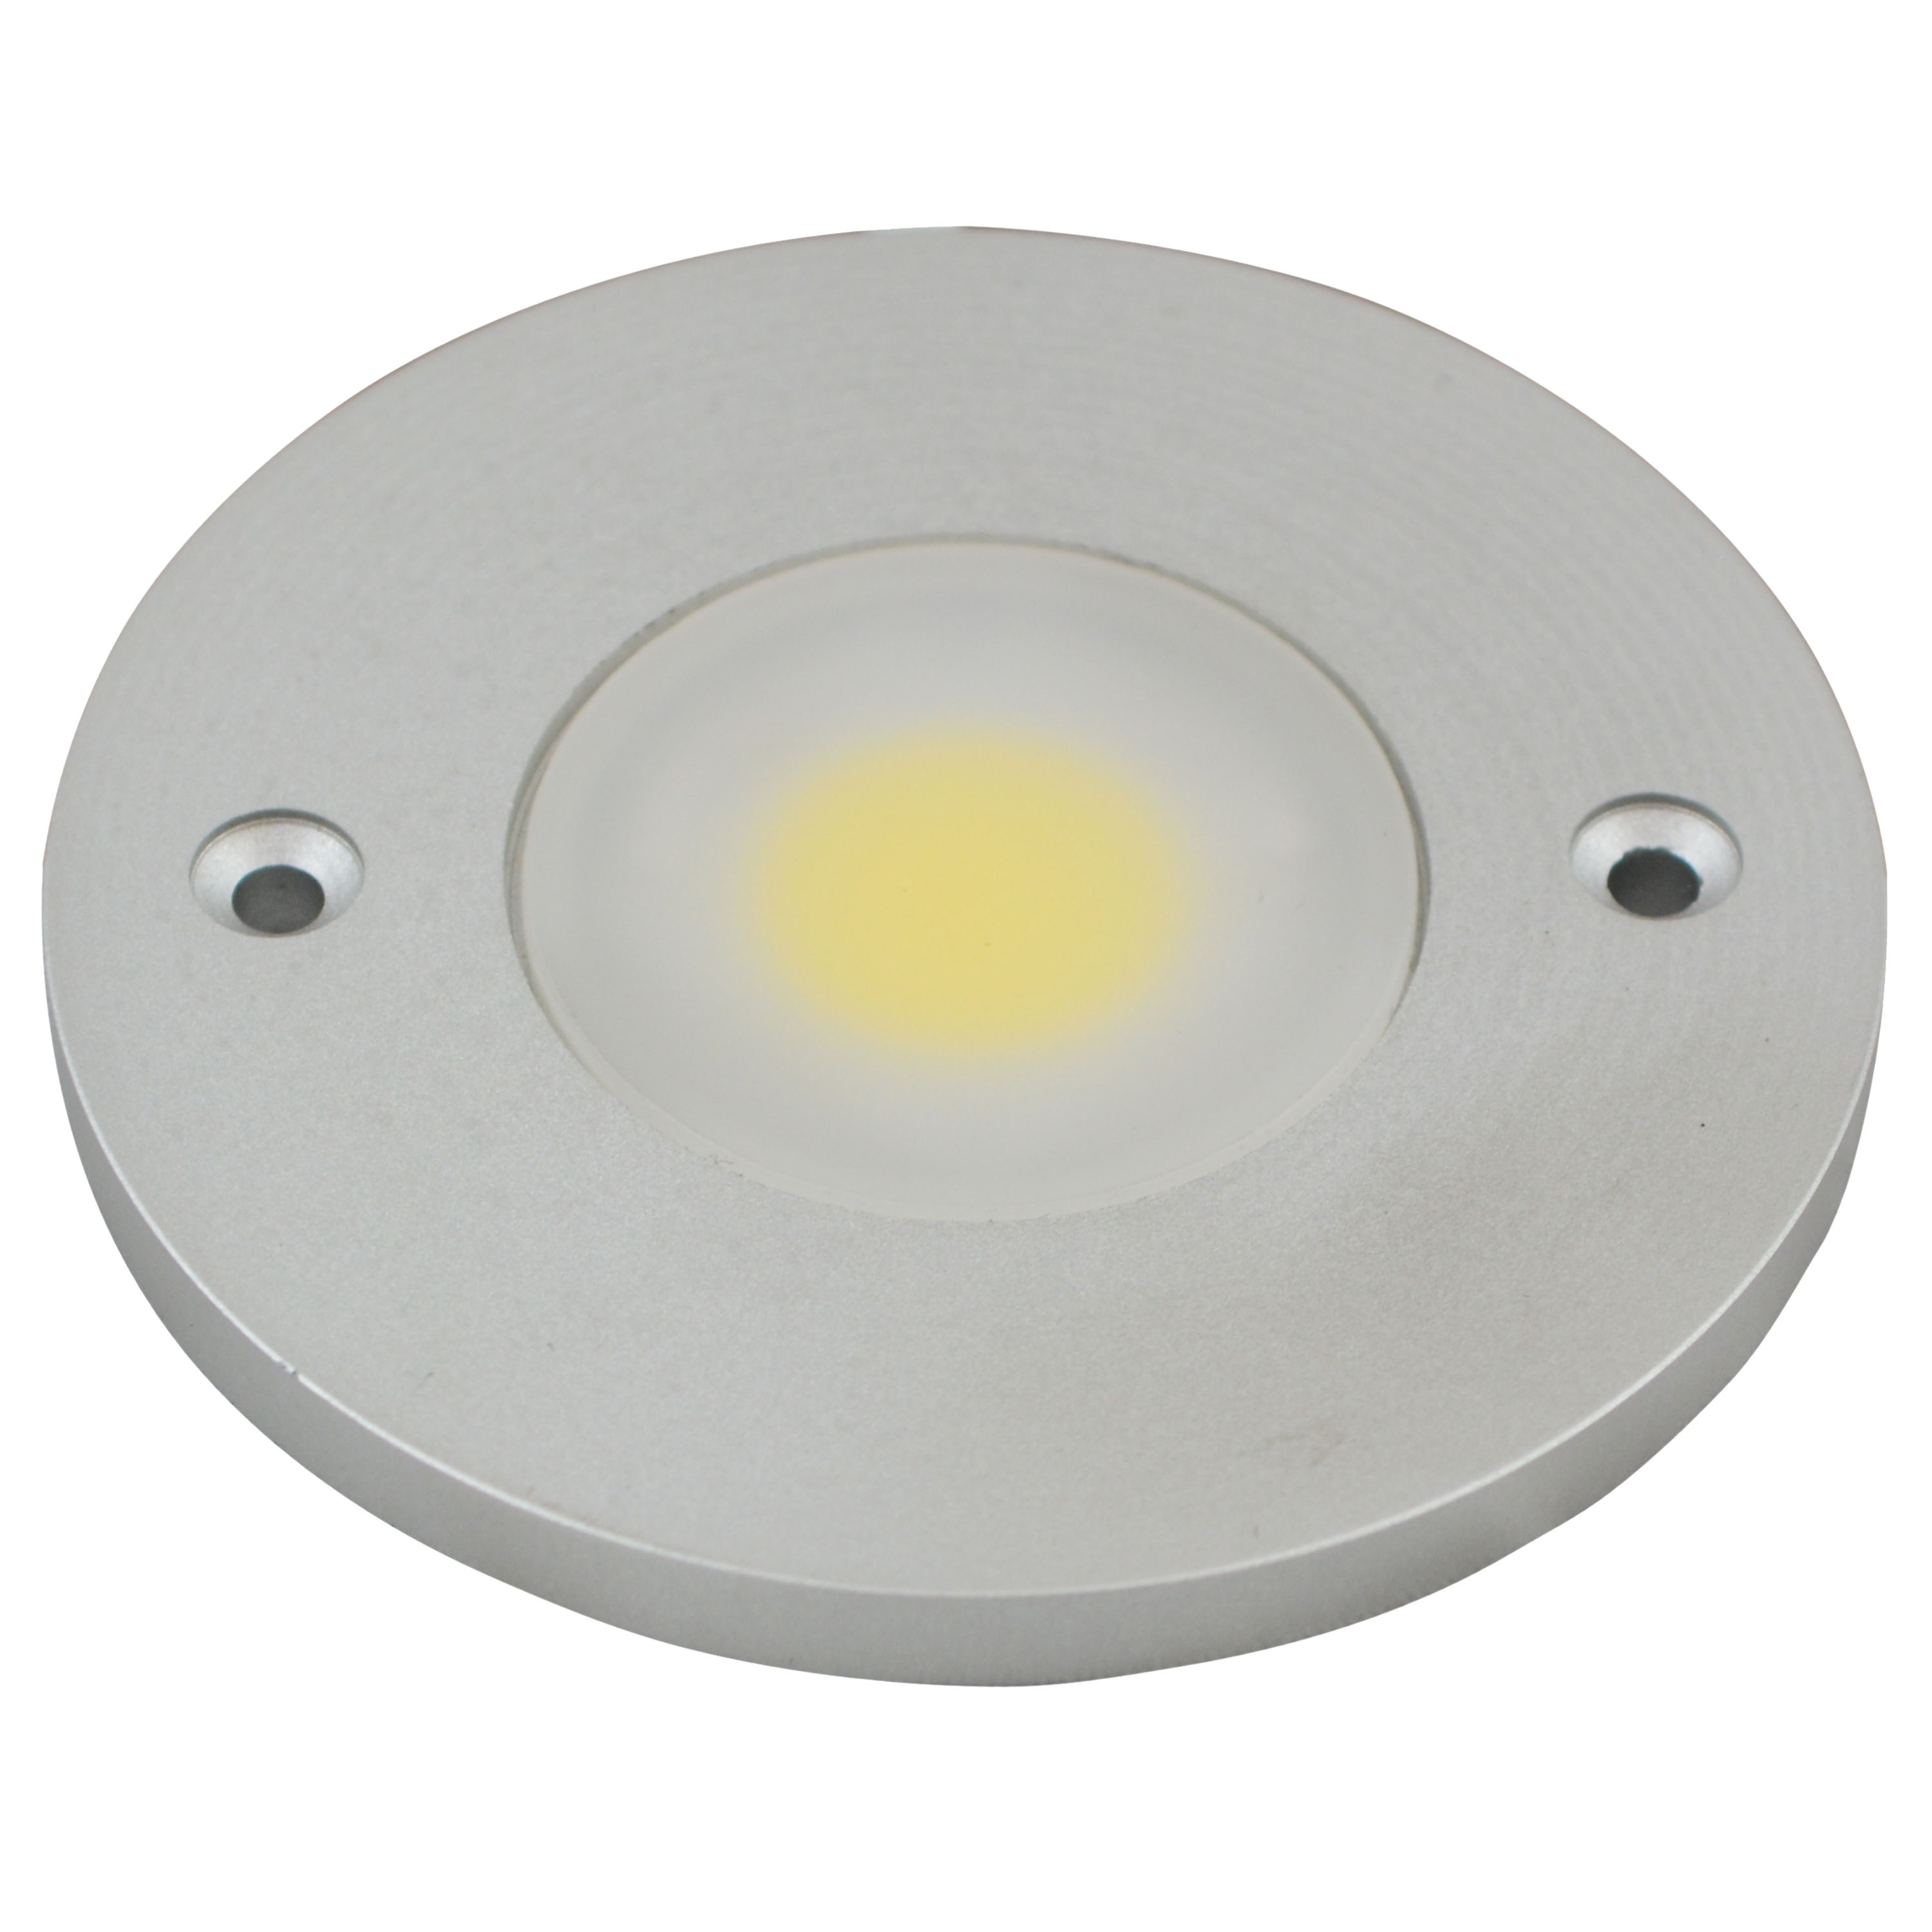 CE certified LED cabinet lighting-Lumiland